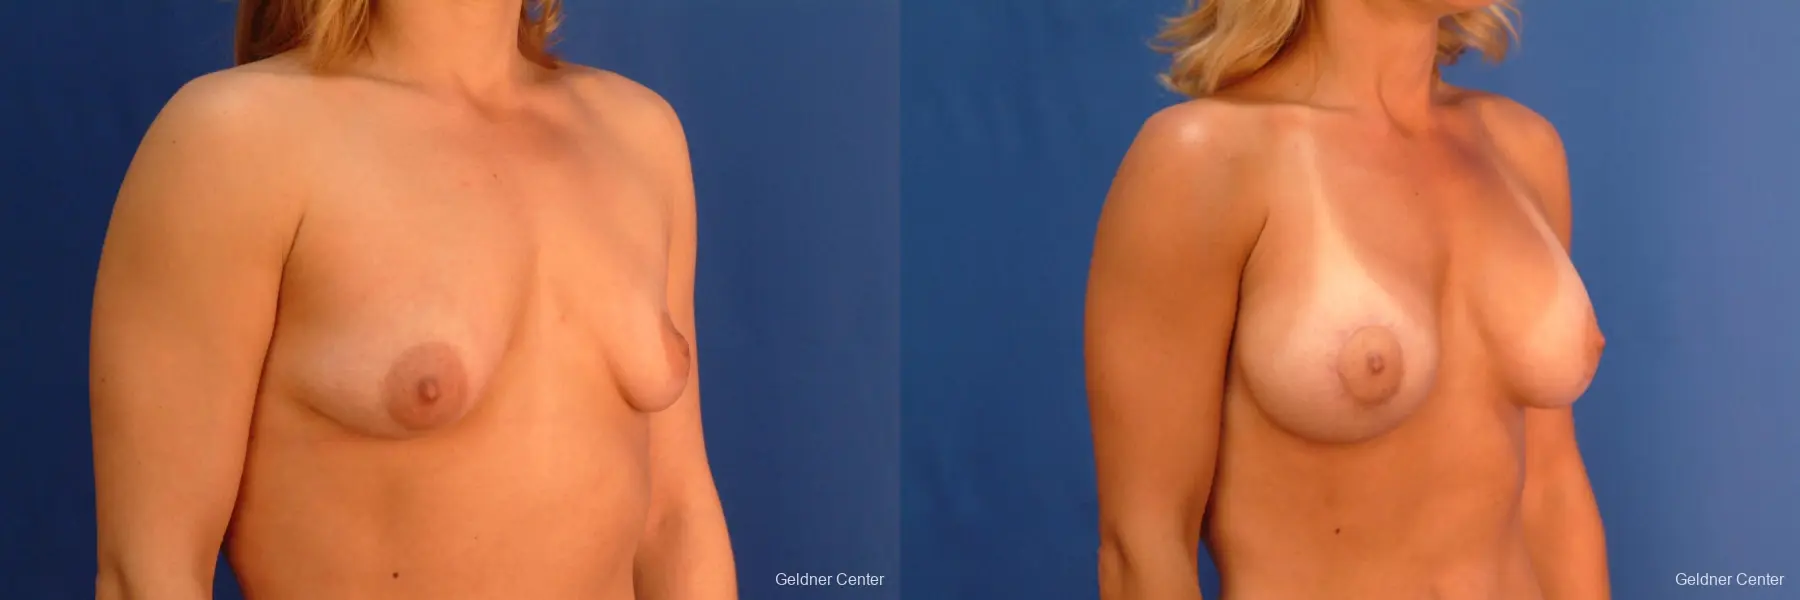 Breast Augmentation Lake Shore Dr, Chicago 2637 - Before and After 3